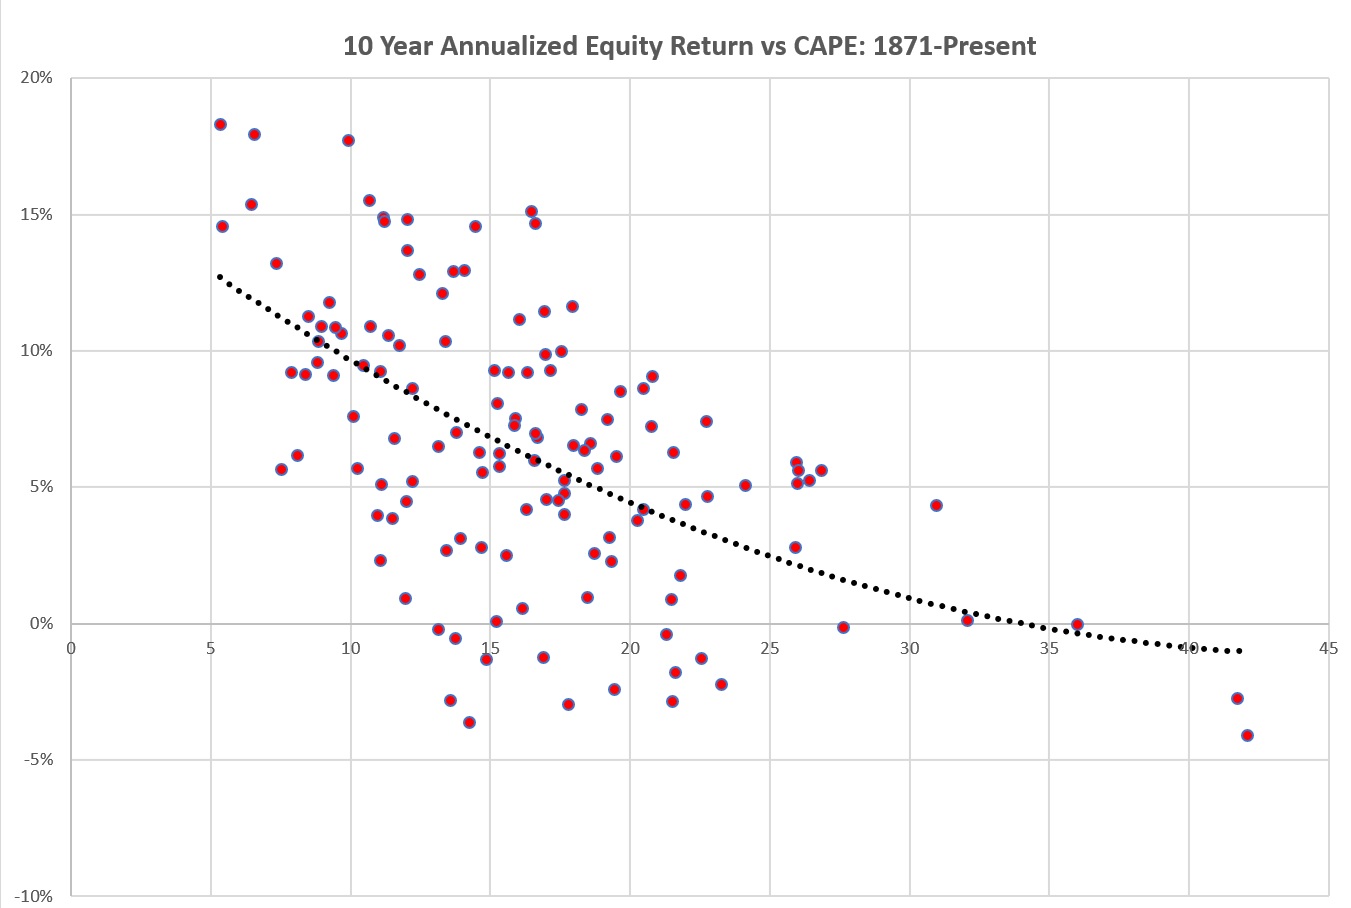 10 year subsequent equity returns vs. Shiller CAPE